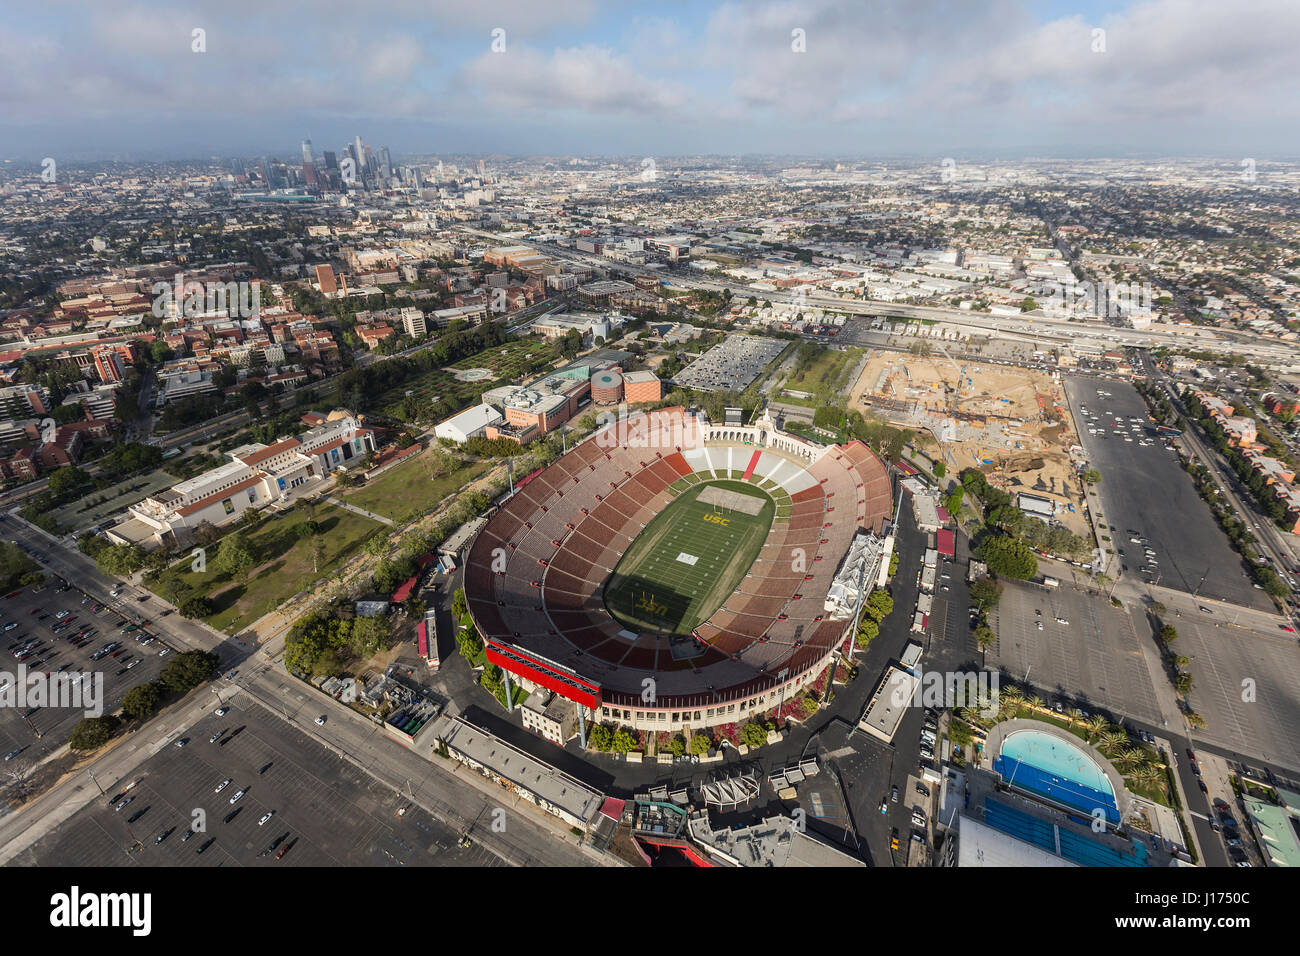 Los Angeles, California, USA - April 12, 2017:  Aerial view of the historic Coliseum stadium with downtown in background. Stock Photo